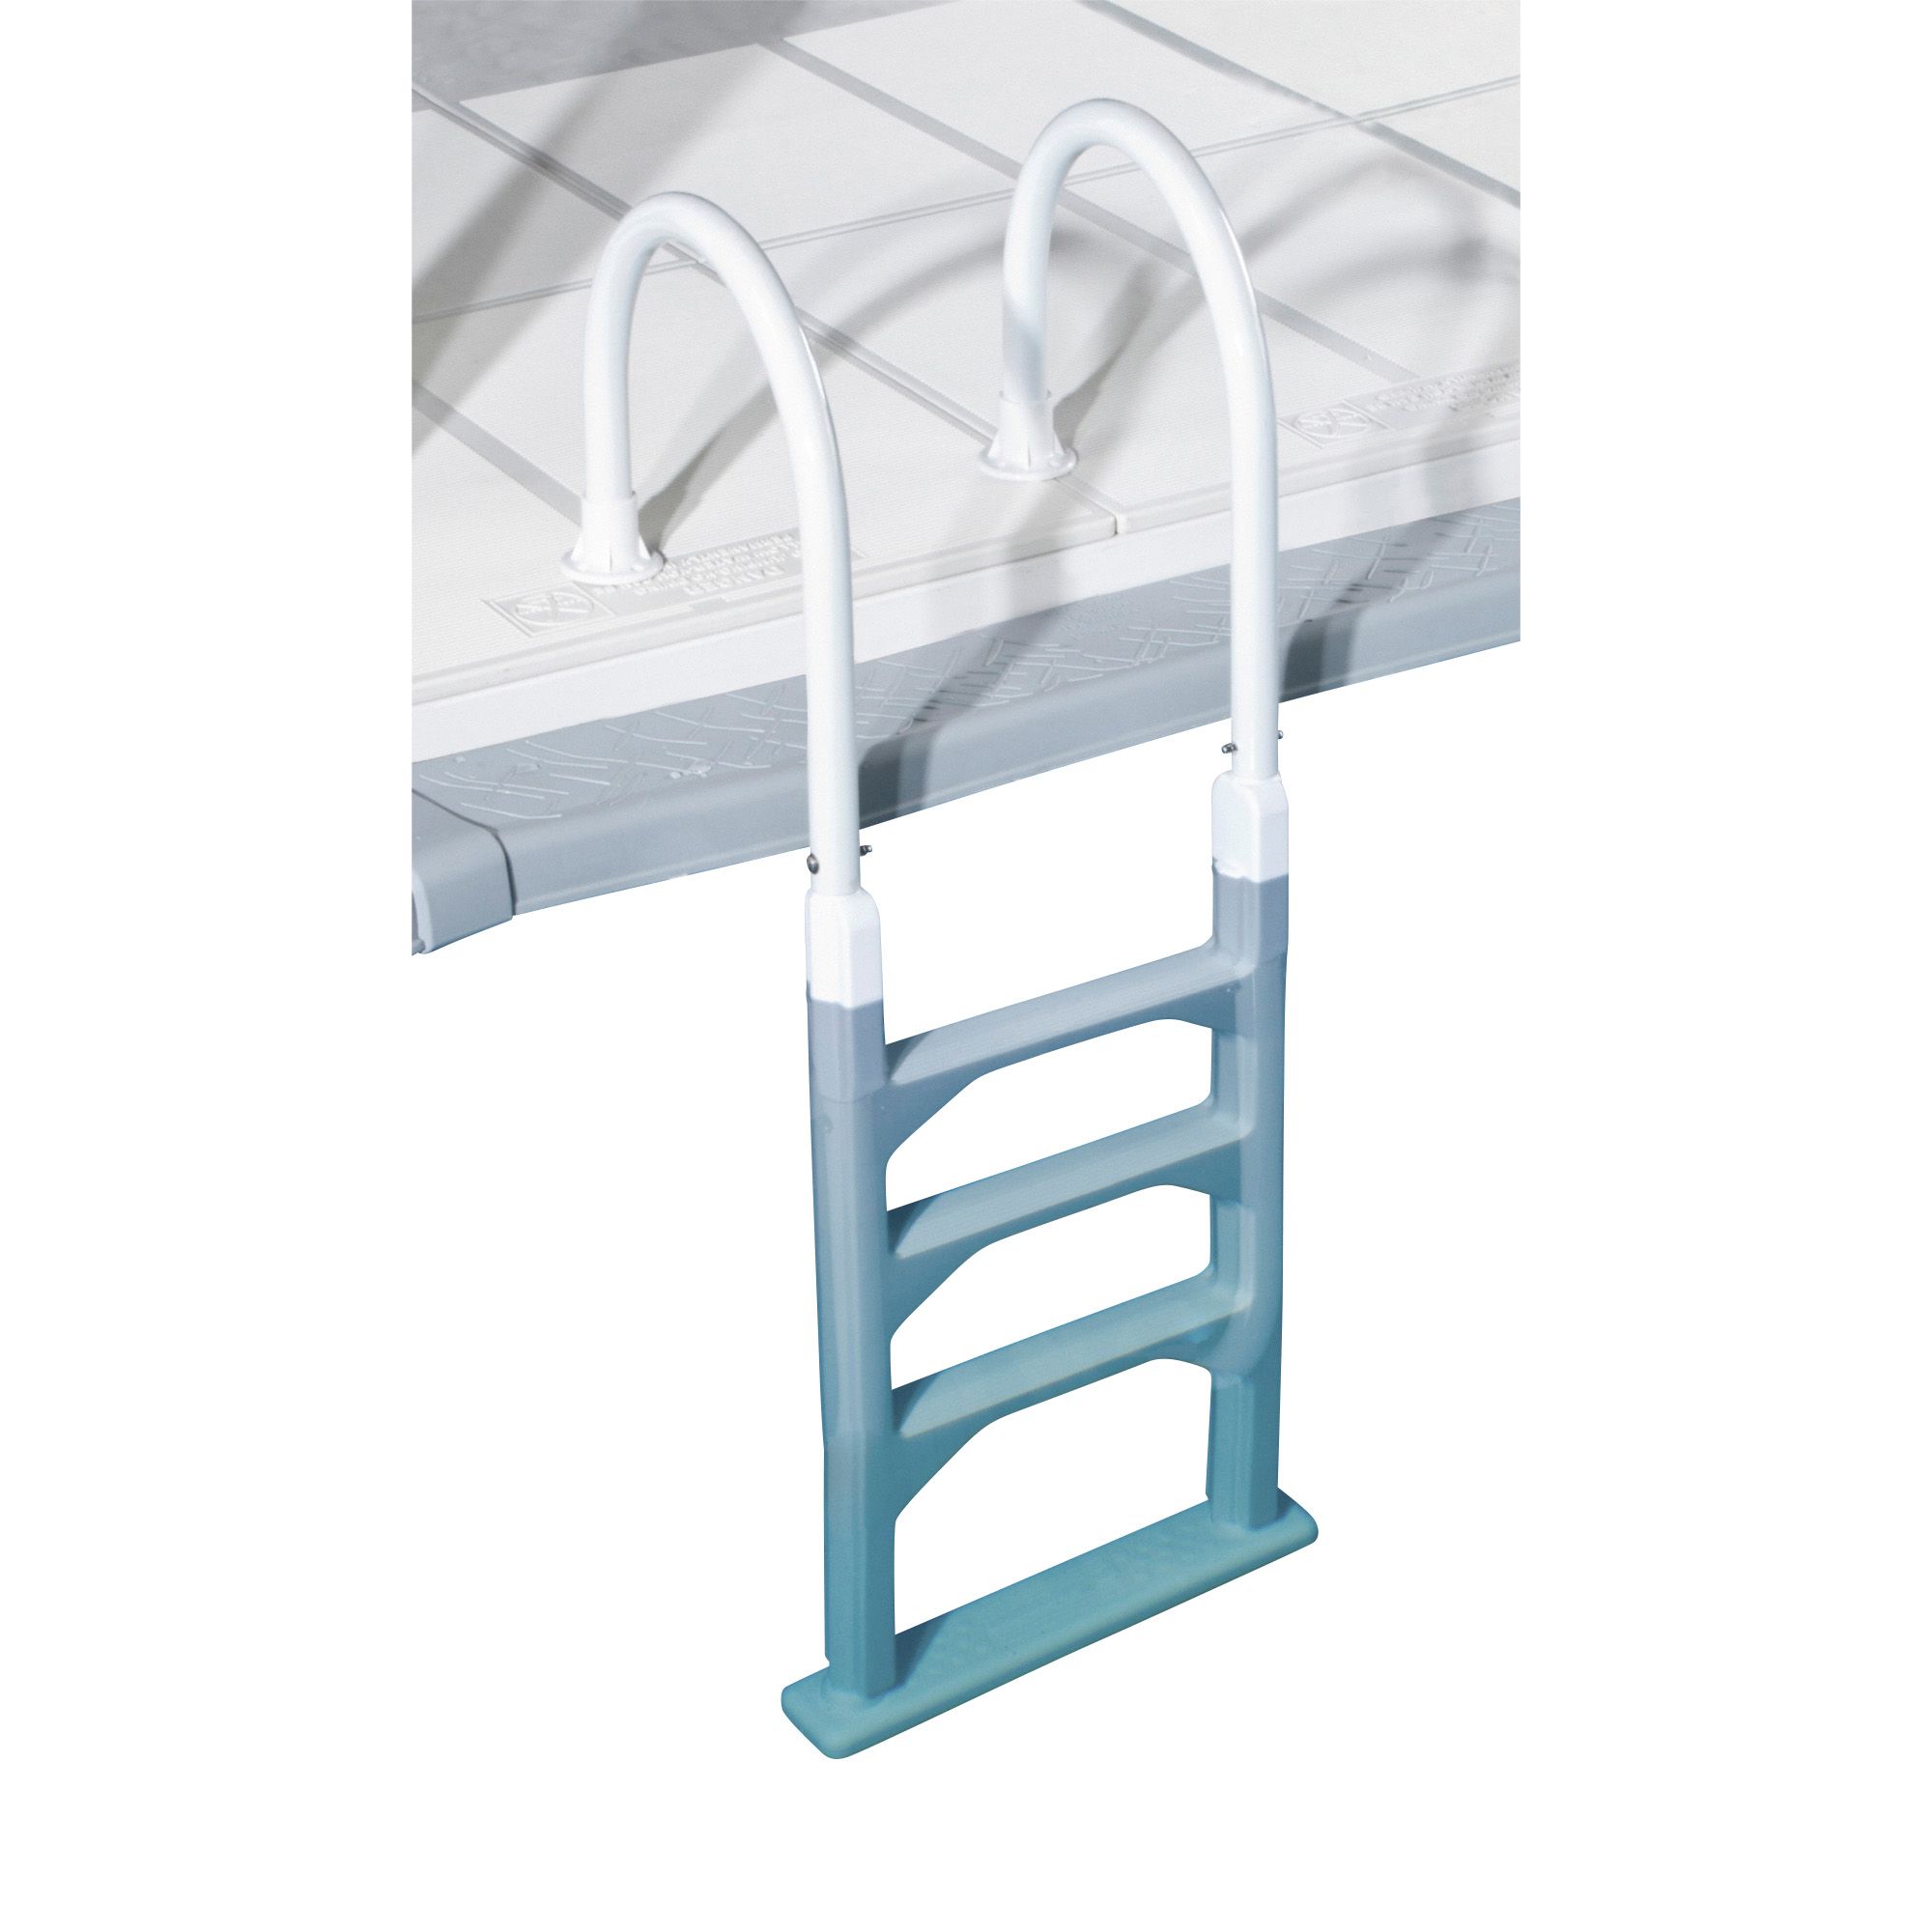 Aluminum/Resin In-Pool Ladder for Above Ground Pools up to 54 inch Deep Aluminum 